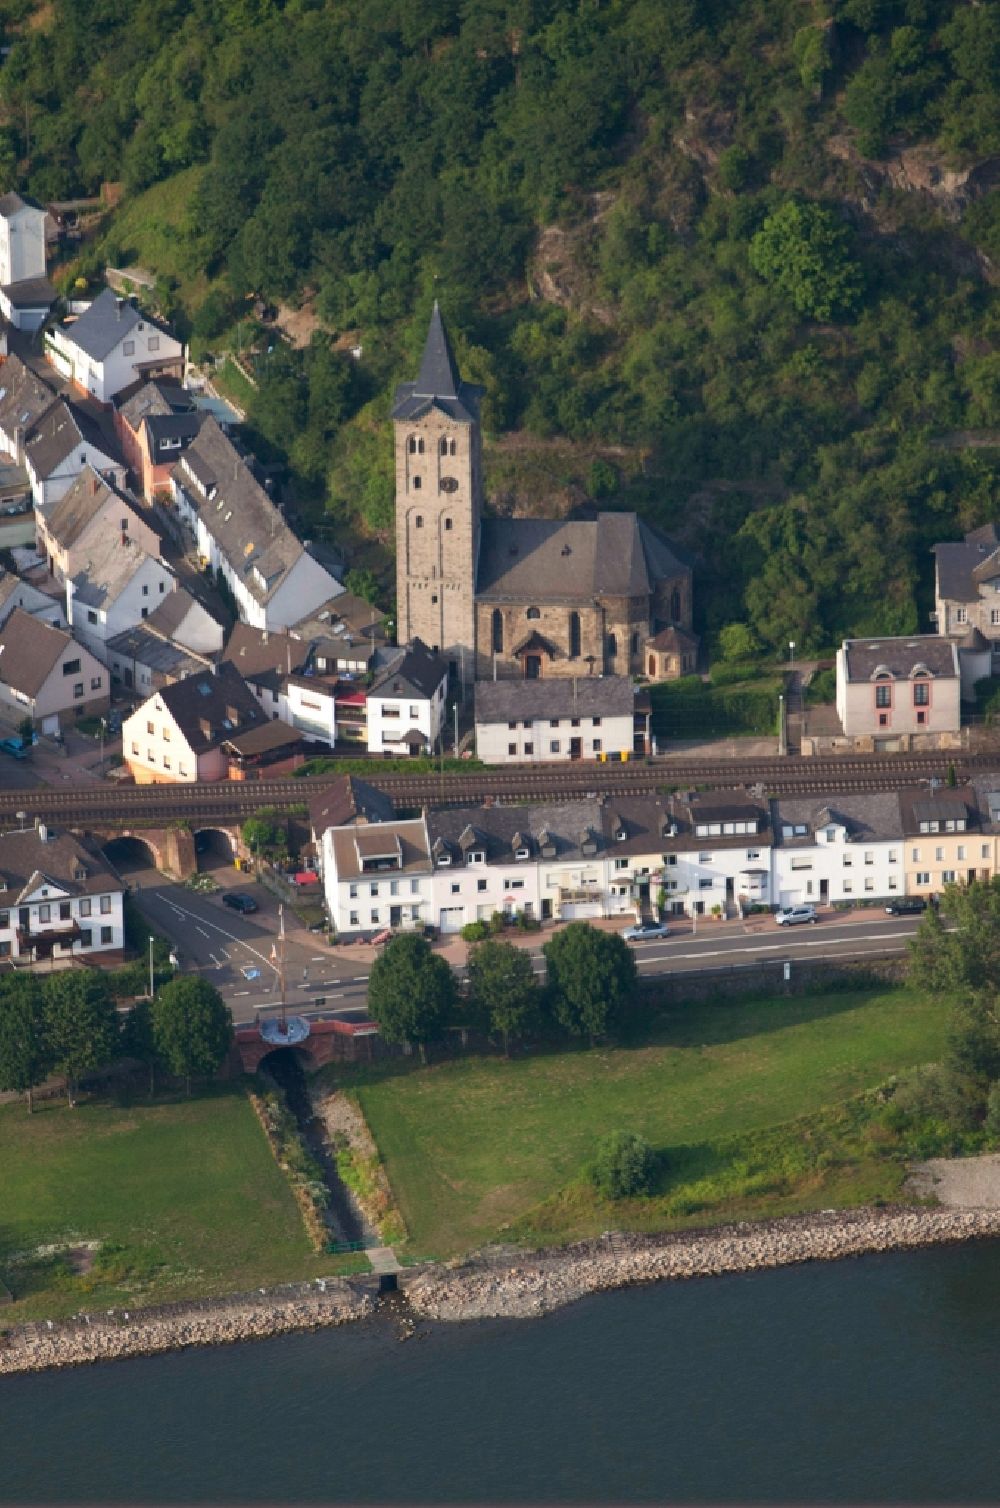 Sankt Goarshausen from the bird's eye view: Town centre of Sankt Goarshausen- Wellmich in the state Rhineland-Palatinate, Germany. The Loreley town is located in the Rhine-Lahn county district on the right riverbank of the Rhine. It is an official tourist resort sitting on the steep slopes of the riverfront. In the center of the image the Catholic church of Saint Martin